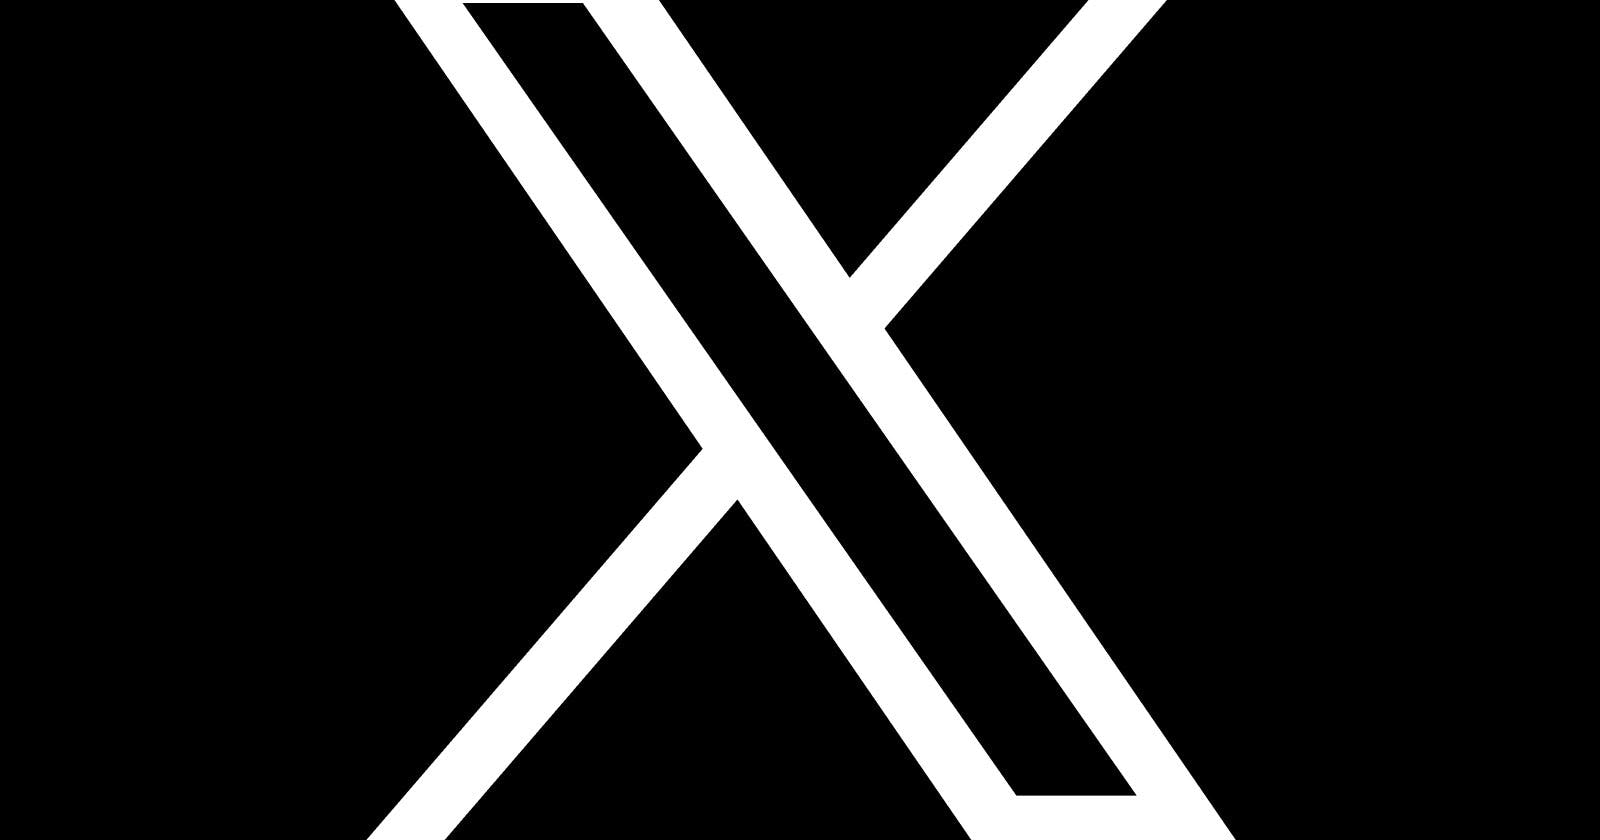 Getting Started With X (formerly "Twitter")